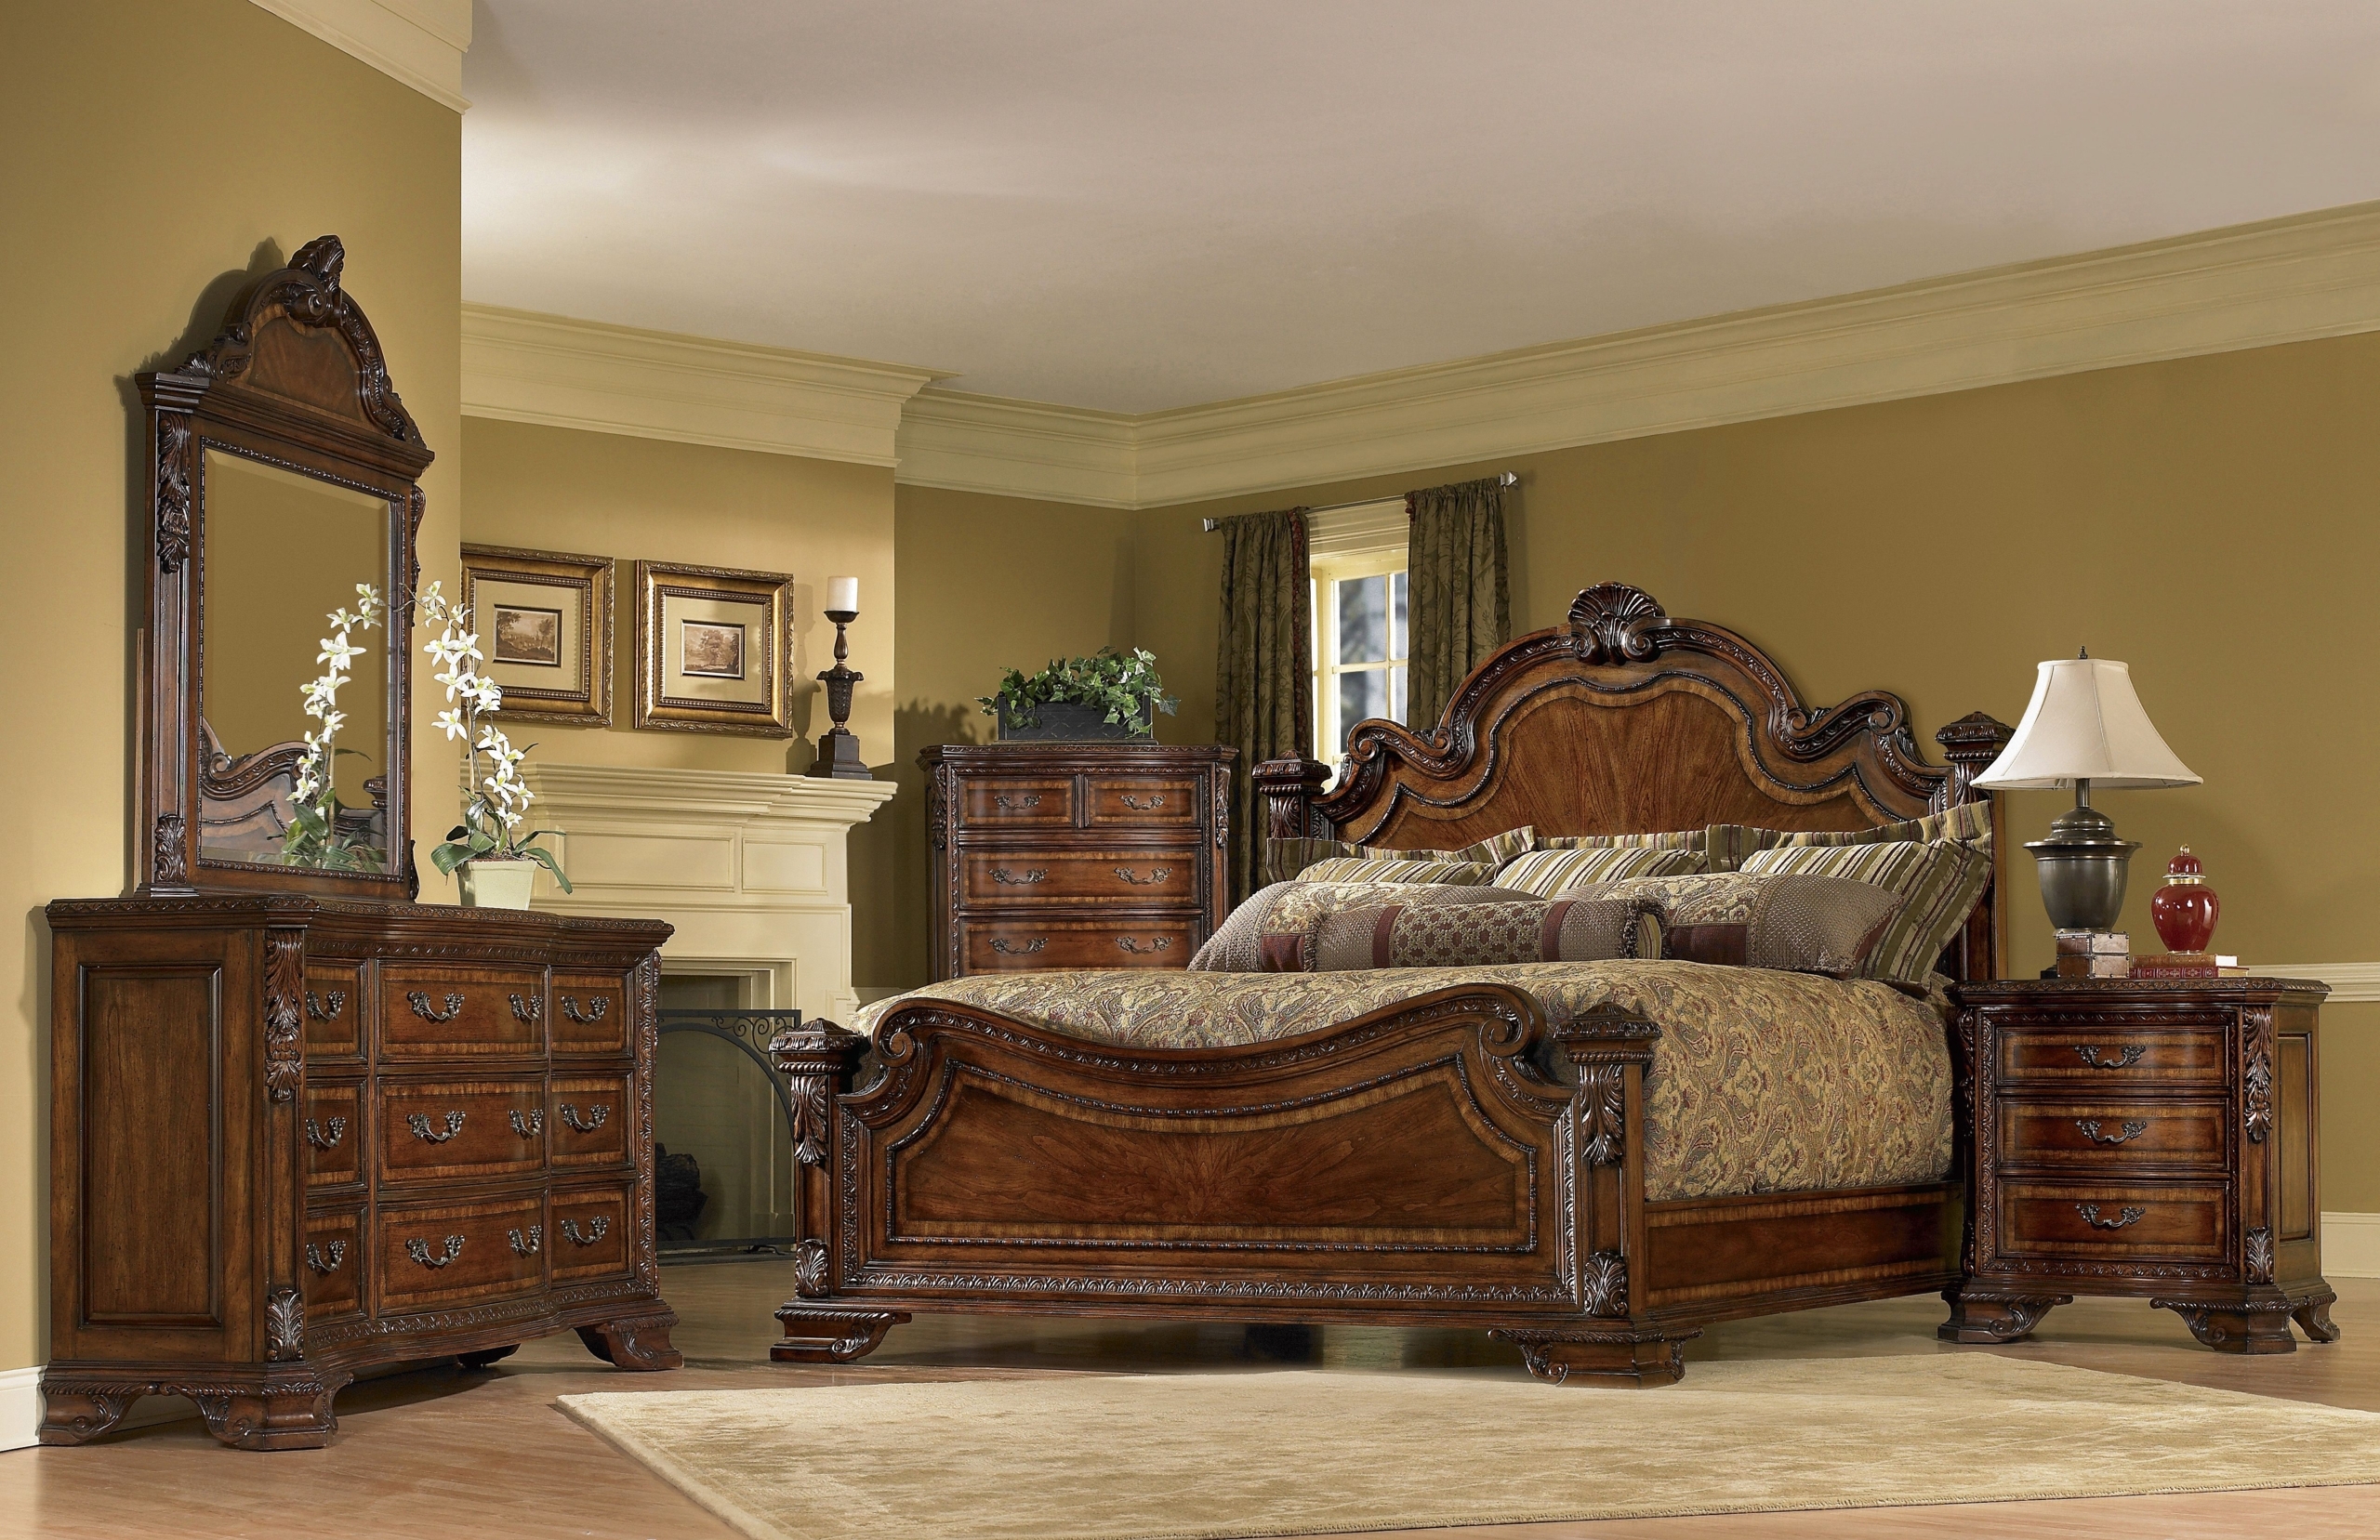 federal style antique bedroom furniture